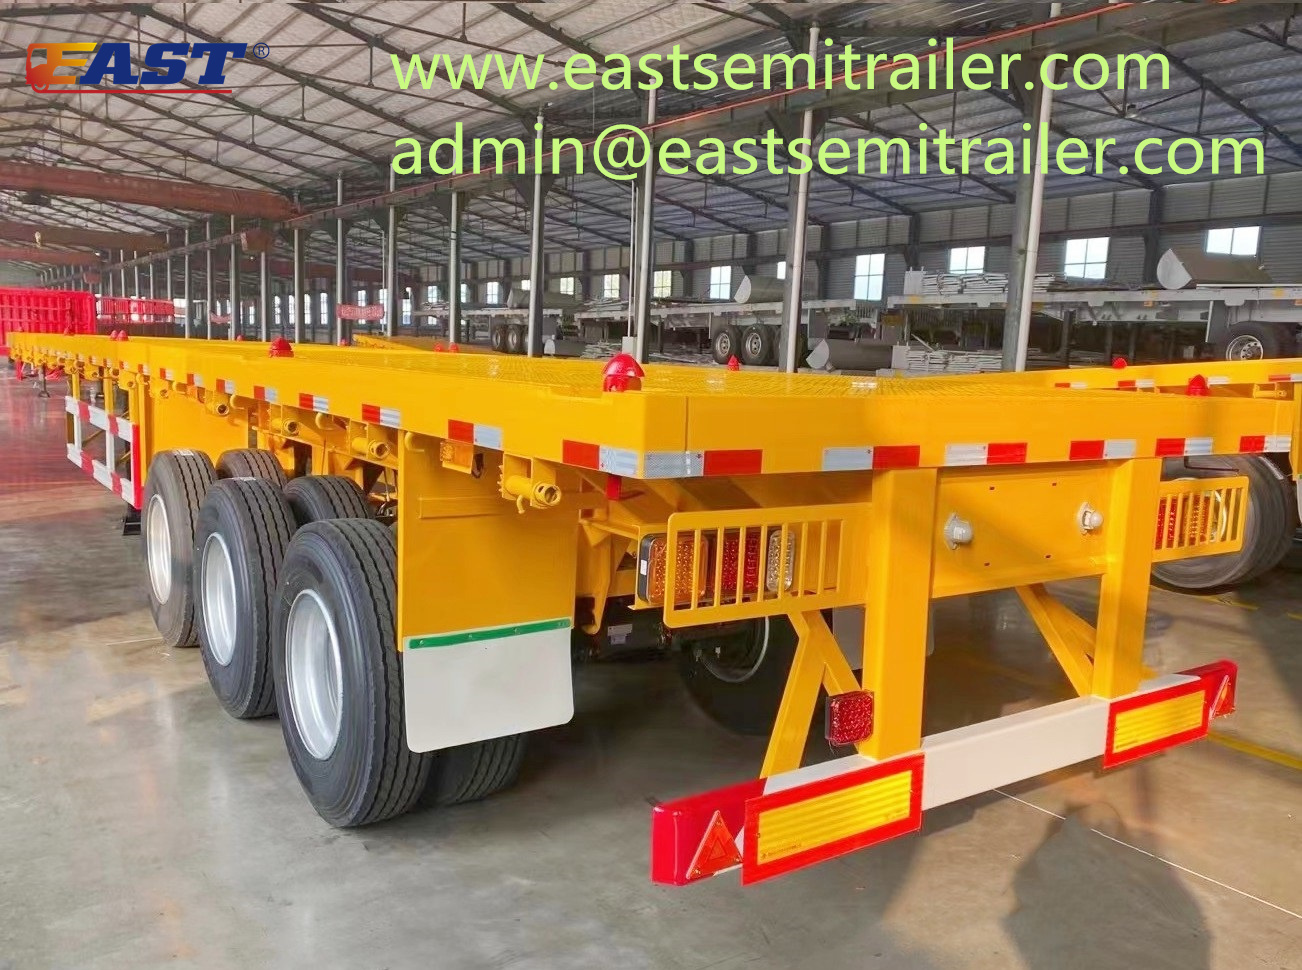 Newly produced container flatbed trailer